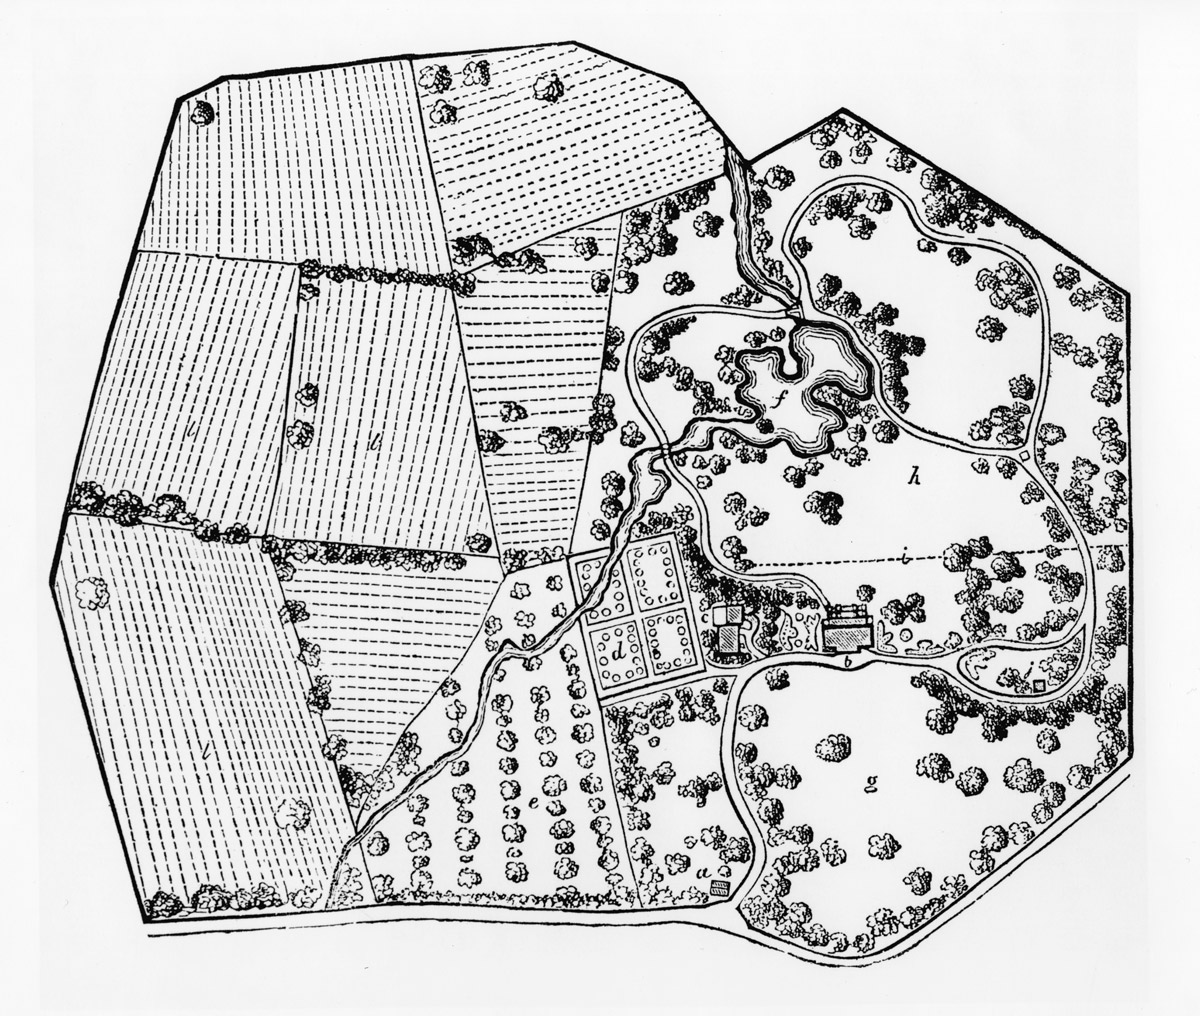 Fig. 10, Anonymous, "Plan of a Mansion Residence, laid out in the natural style," in A. J. Downing, A Treatise on the Theory and Practice of Landscape Gardening (1849), p. 115, fig. 25.